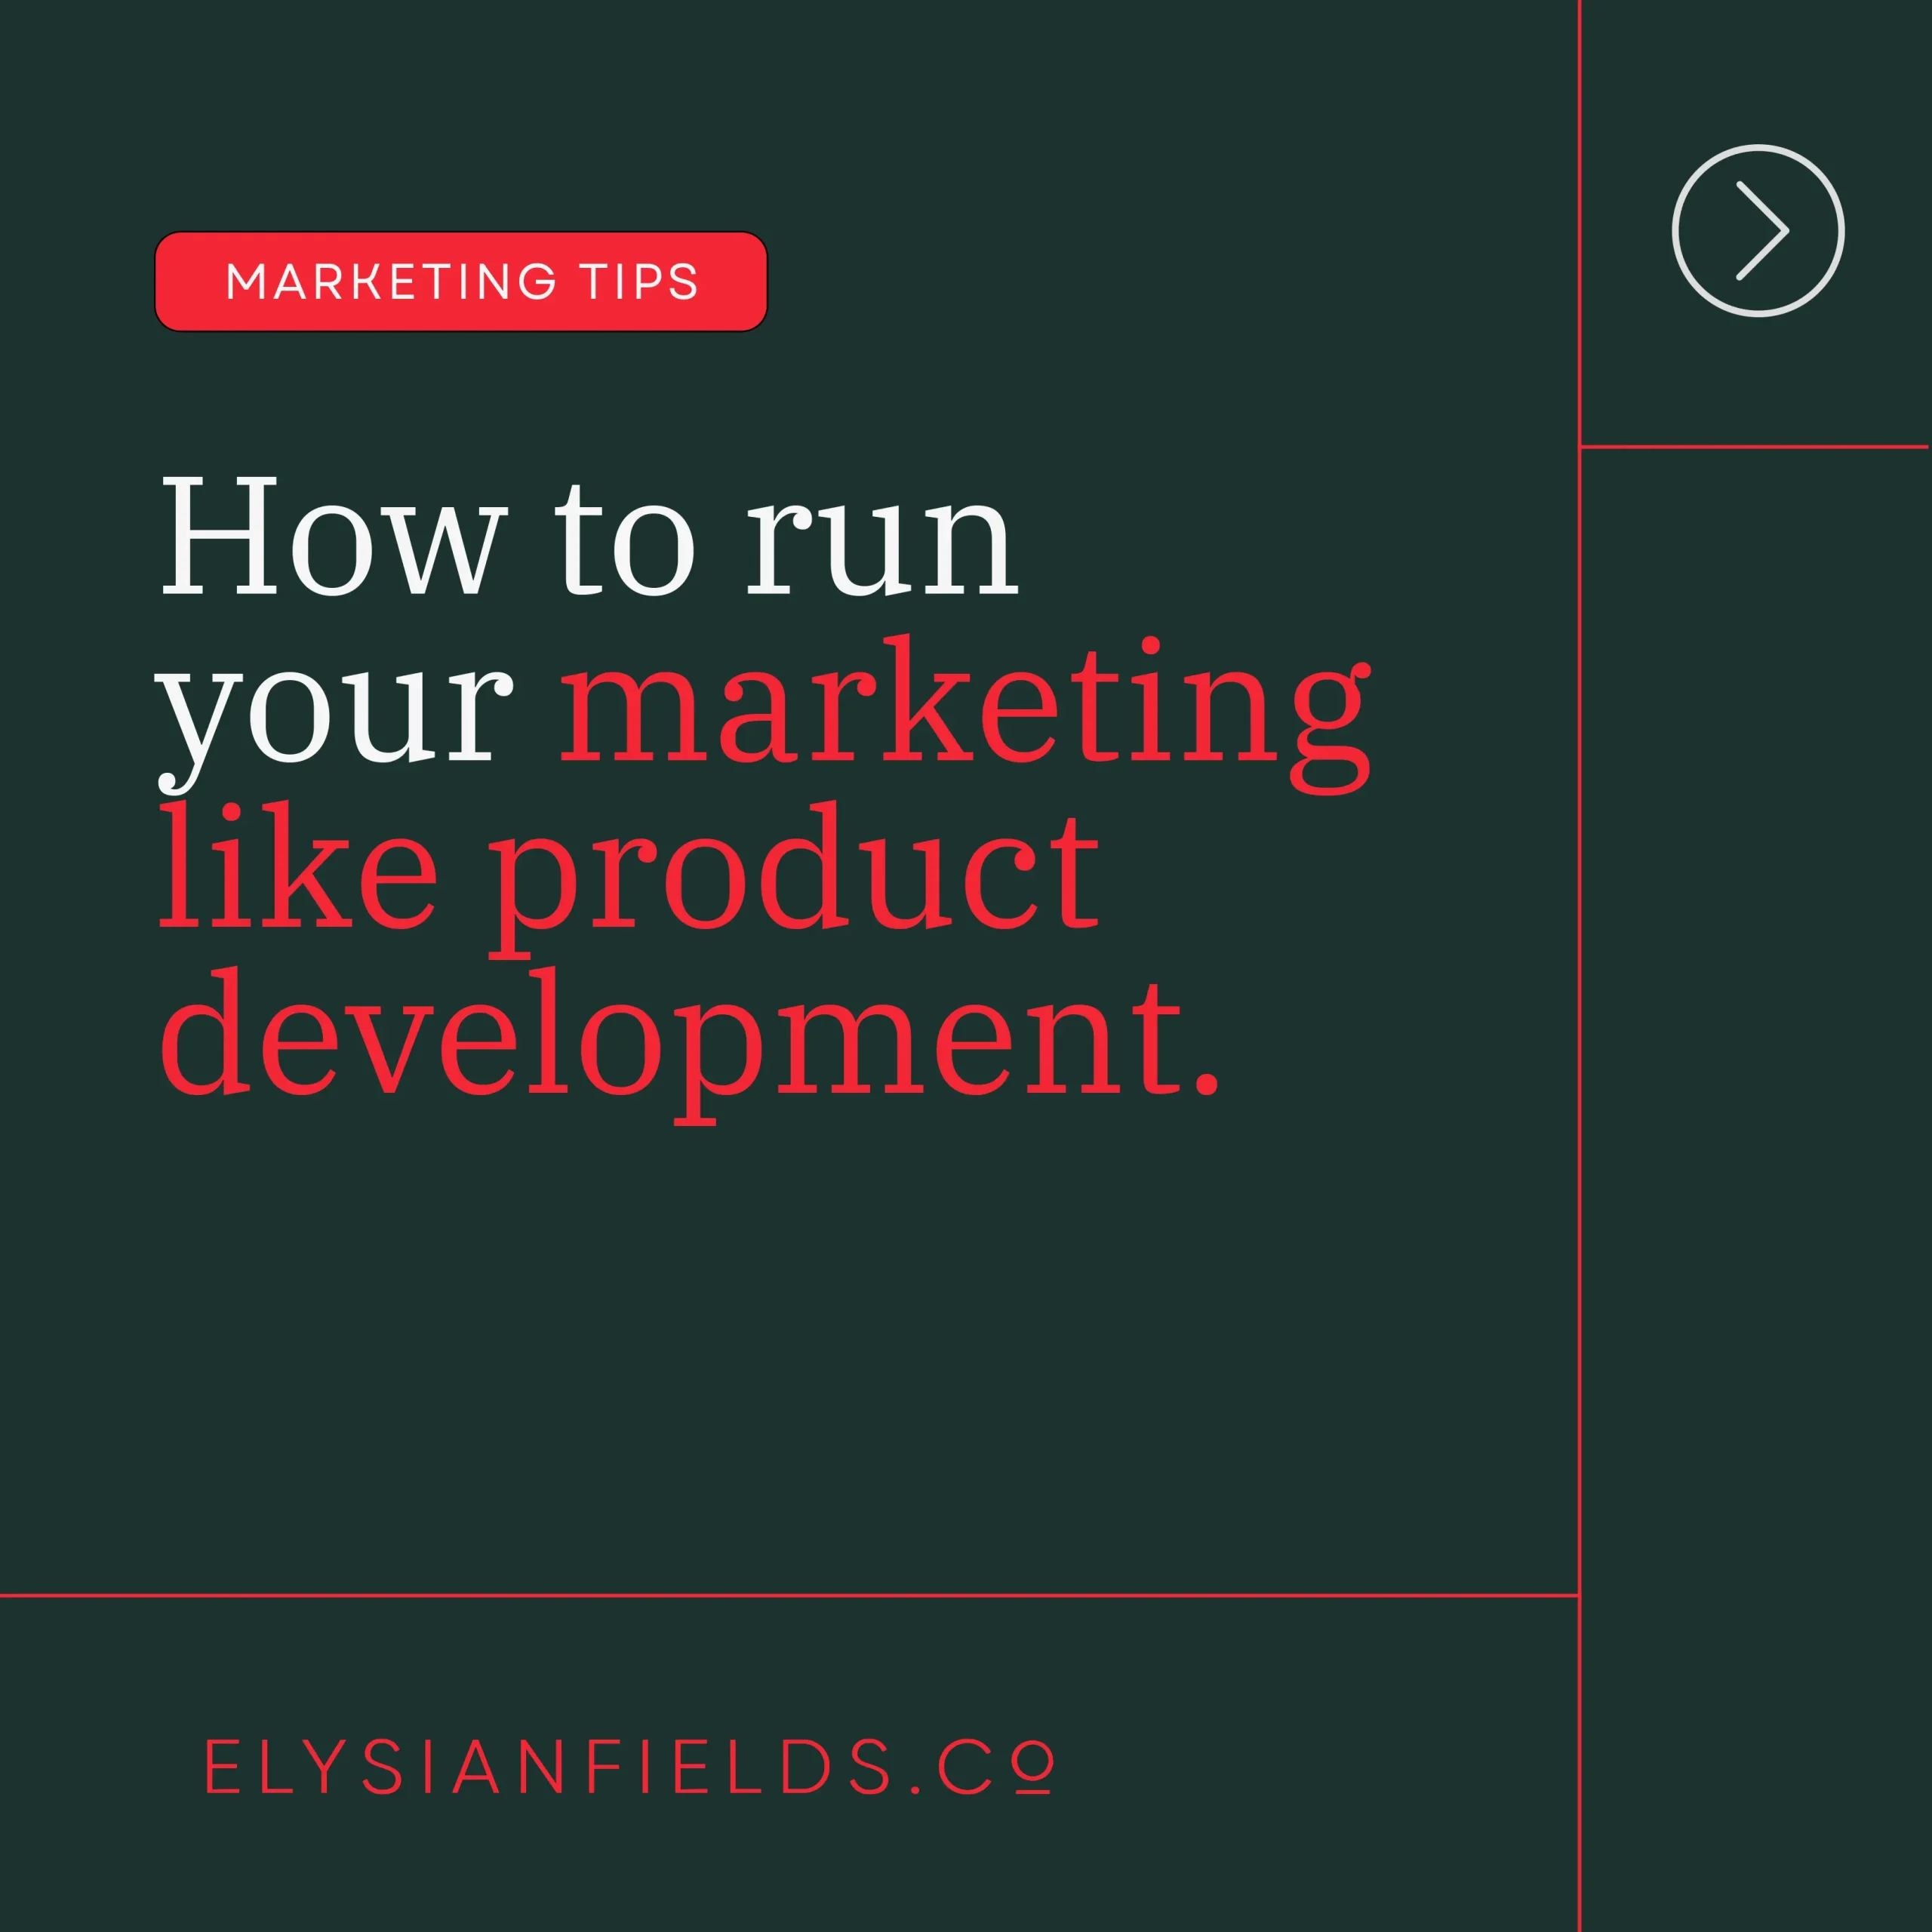 How to run your marketing like product development